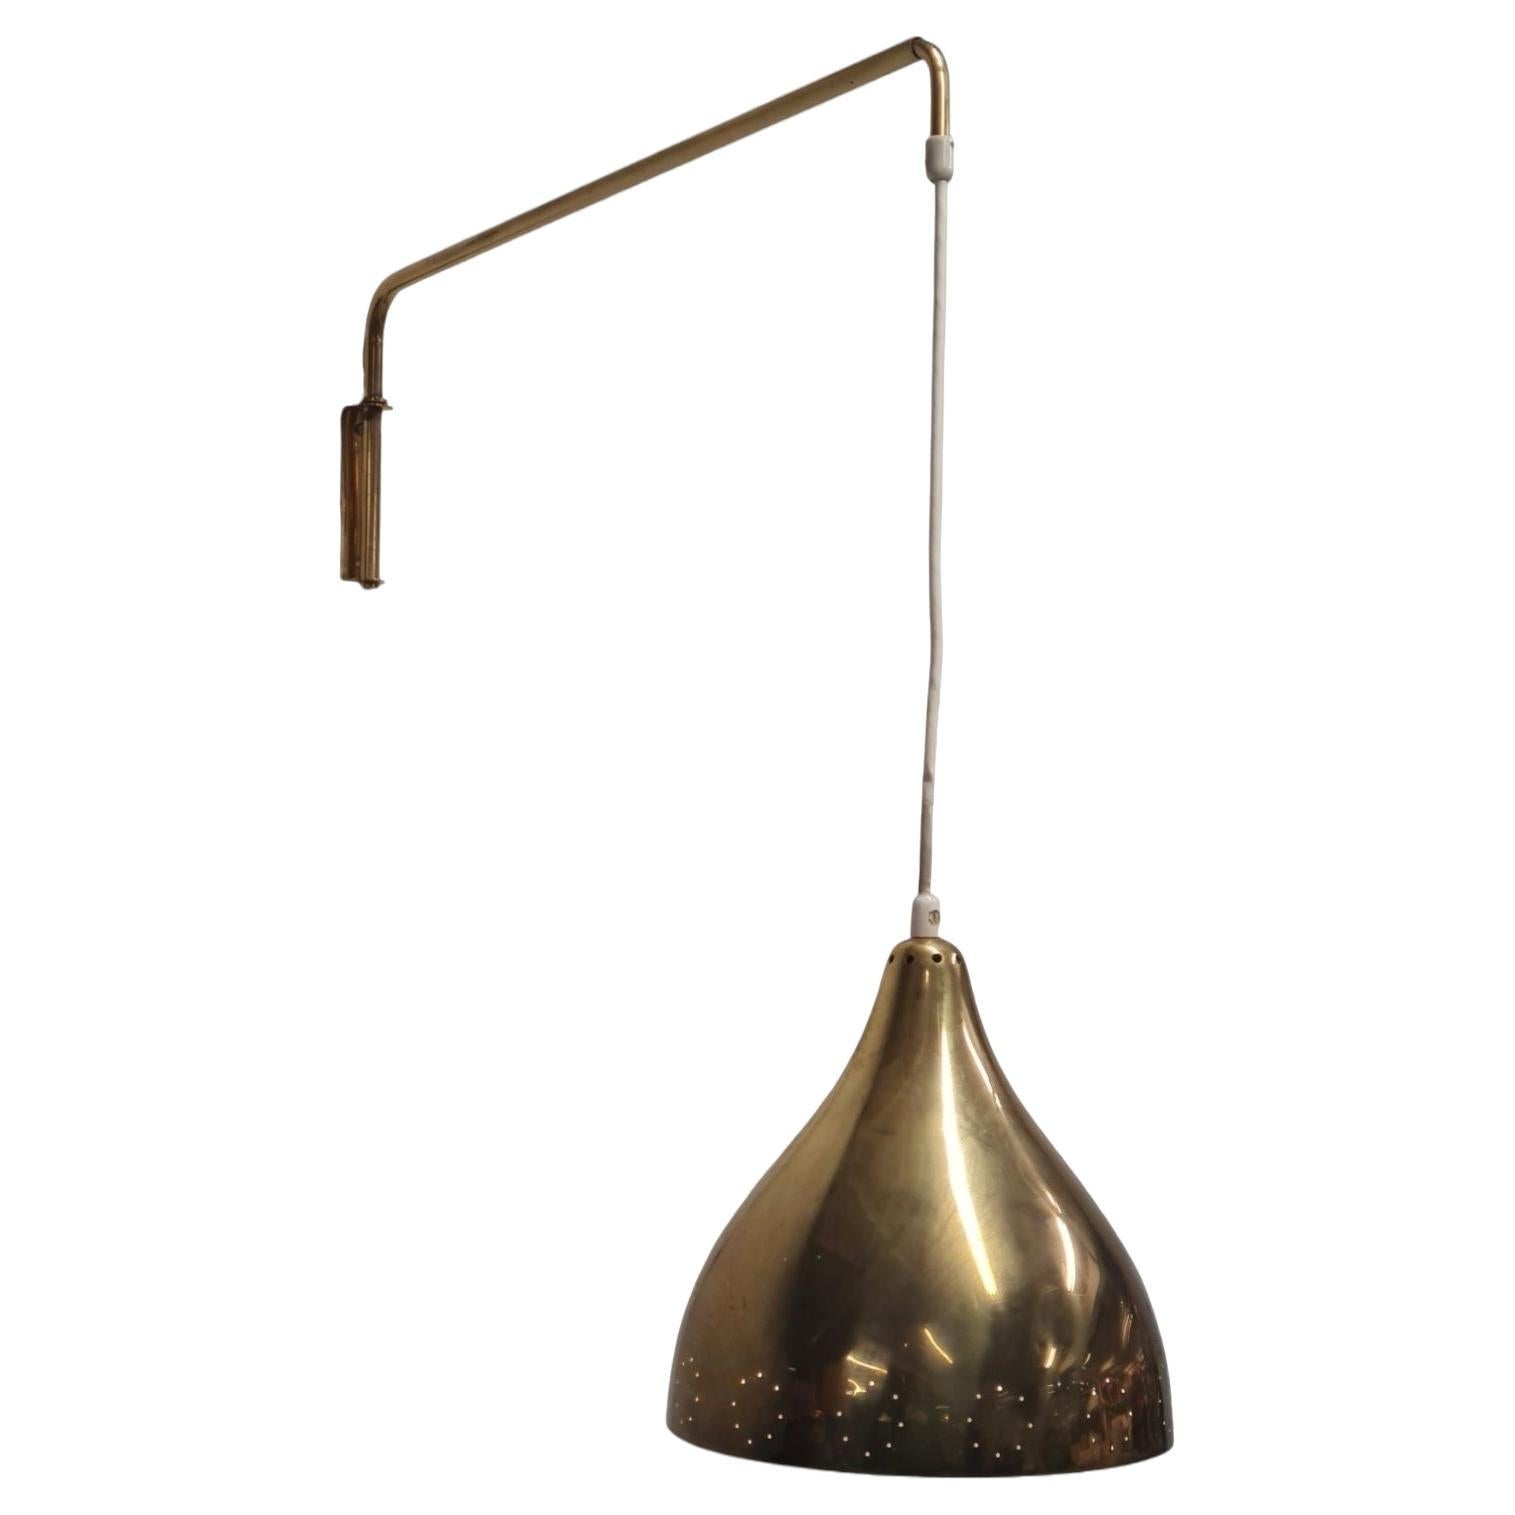 Itsu Telescopic Wall Lamp Model AO 1 in Perfortated Brass For Sale